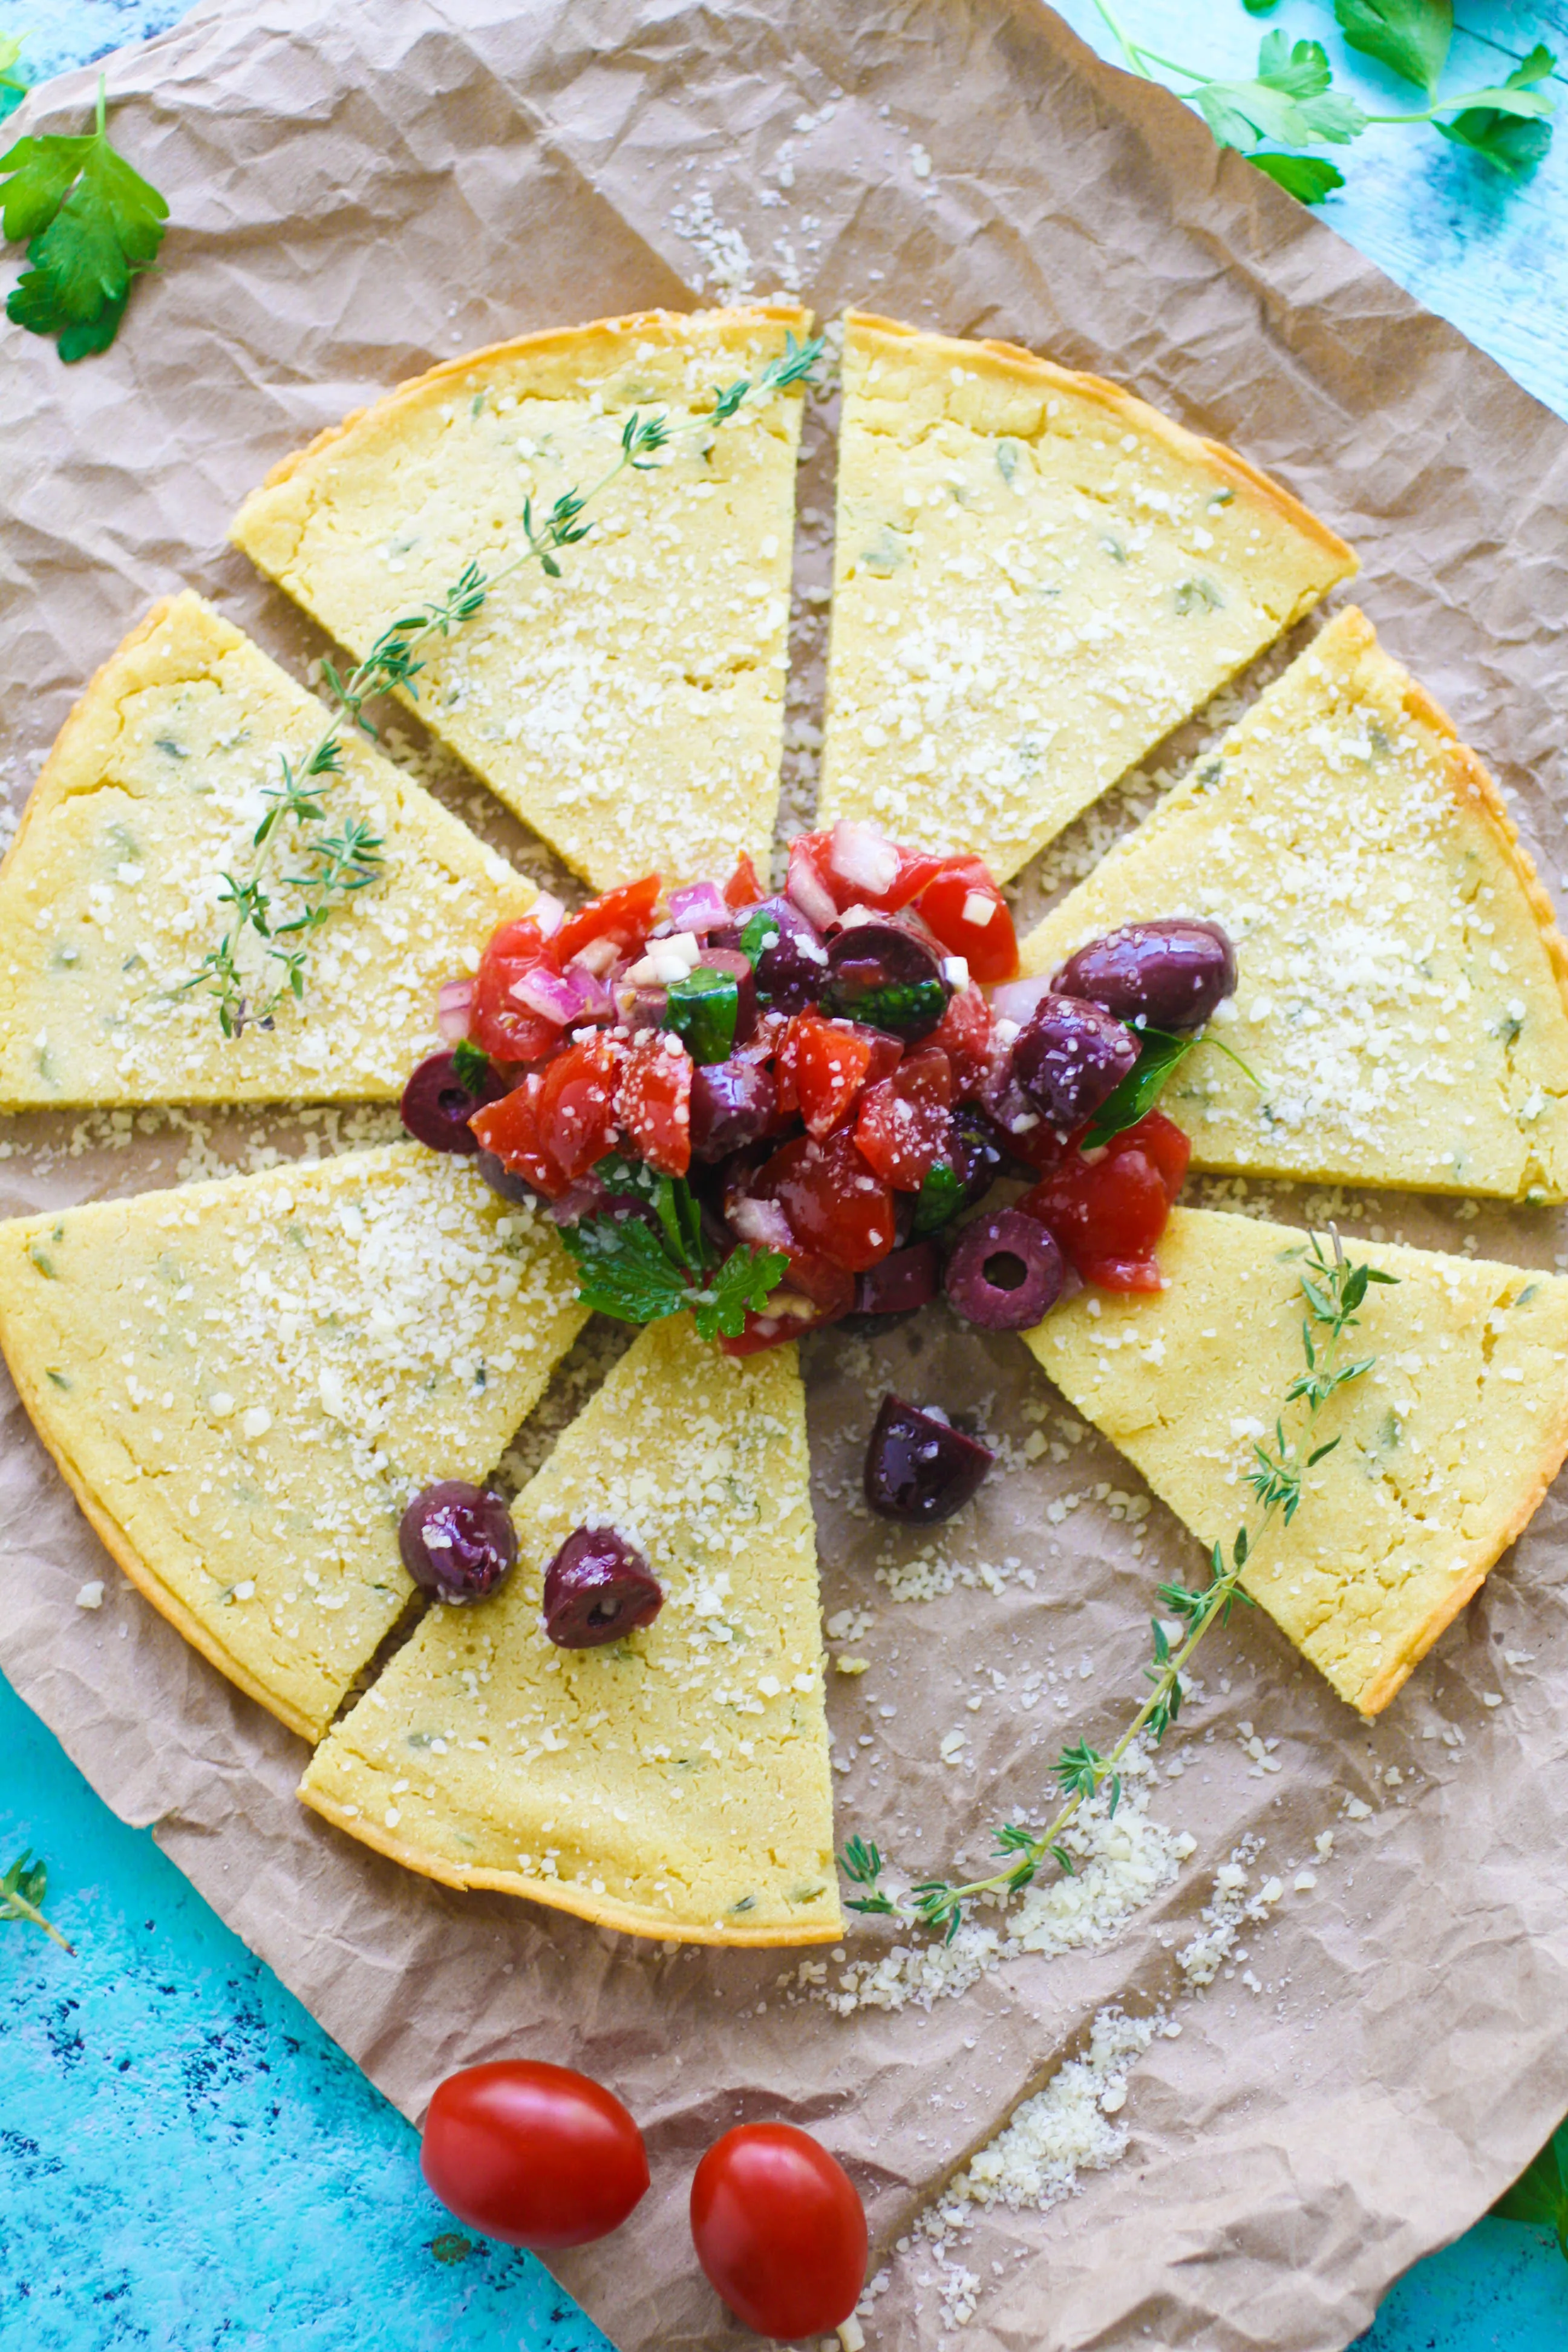 Socca (Chickpea Flour) Flatbread with Tomato and Olive Salad make a wonderful snack between meals. Socca (Chickpea Flour) Flatbread with Tomato and Olive Salad is perfect for a snack, or as an appetizer -- you decide!